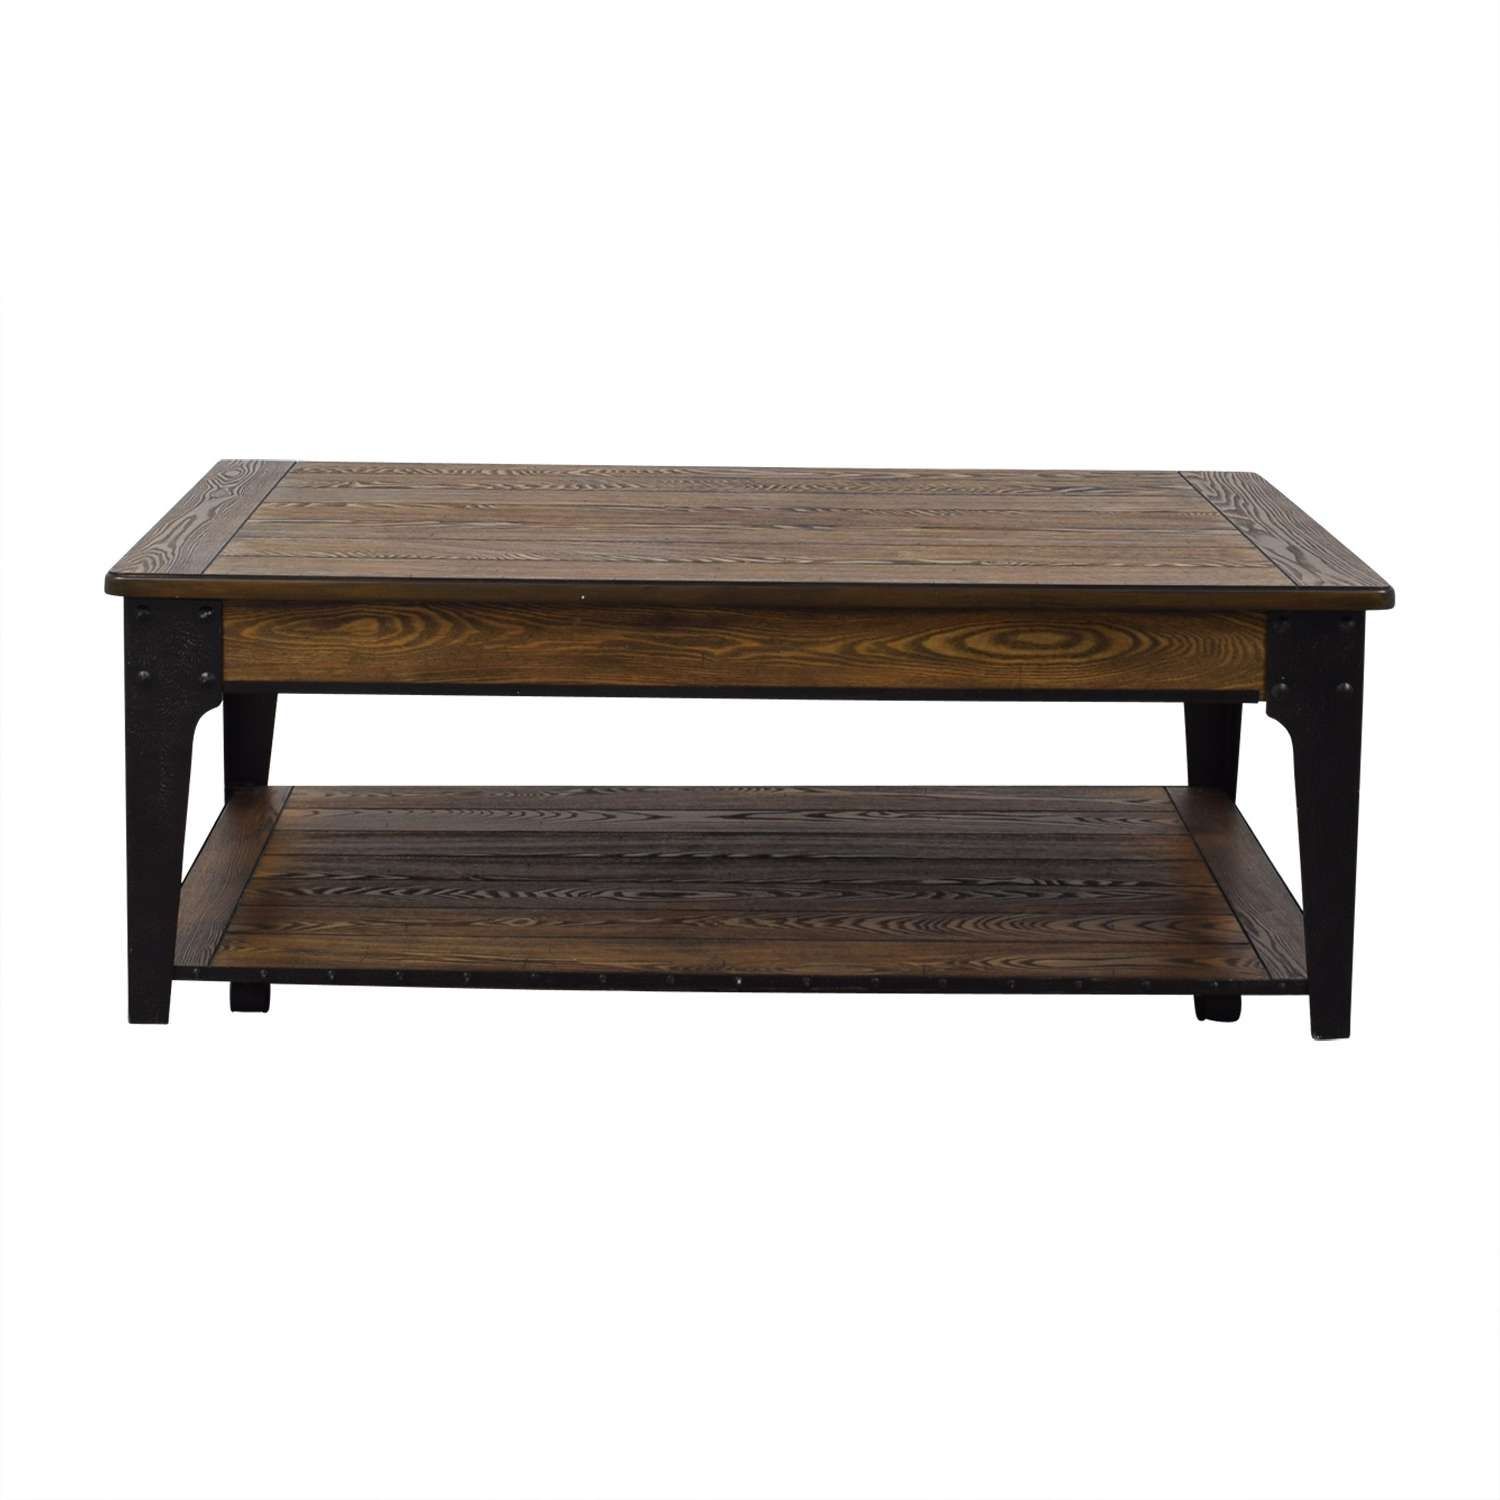 [%2018 Coffee Tables With Wheels With Regard To 37% Off – Magnussen Magnussen Lakehurst Lift Top Coffee Table With|37% Off – Magnussen Magnussen Lakehurst Lift Top Coffee Table With In Preferred Coffee Tables With Wheels%] (Gallery 14 of 20)